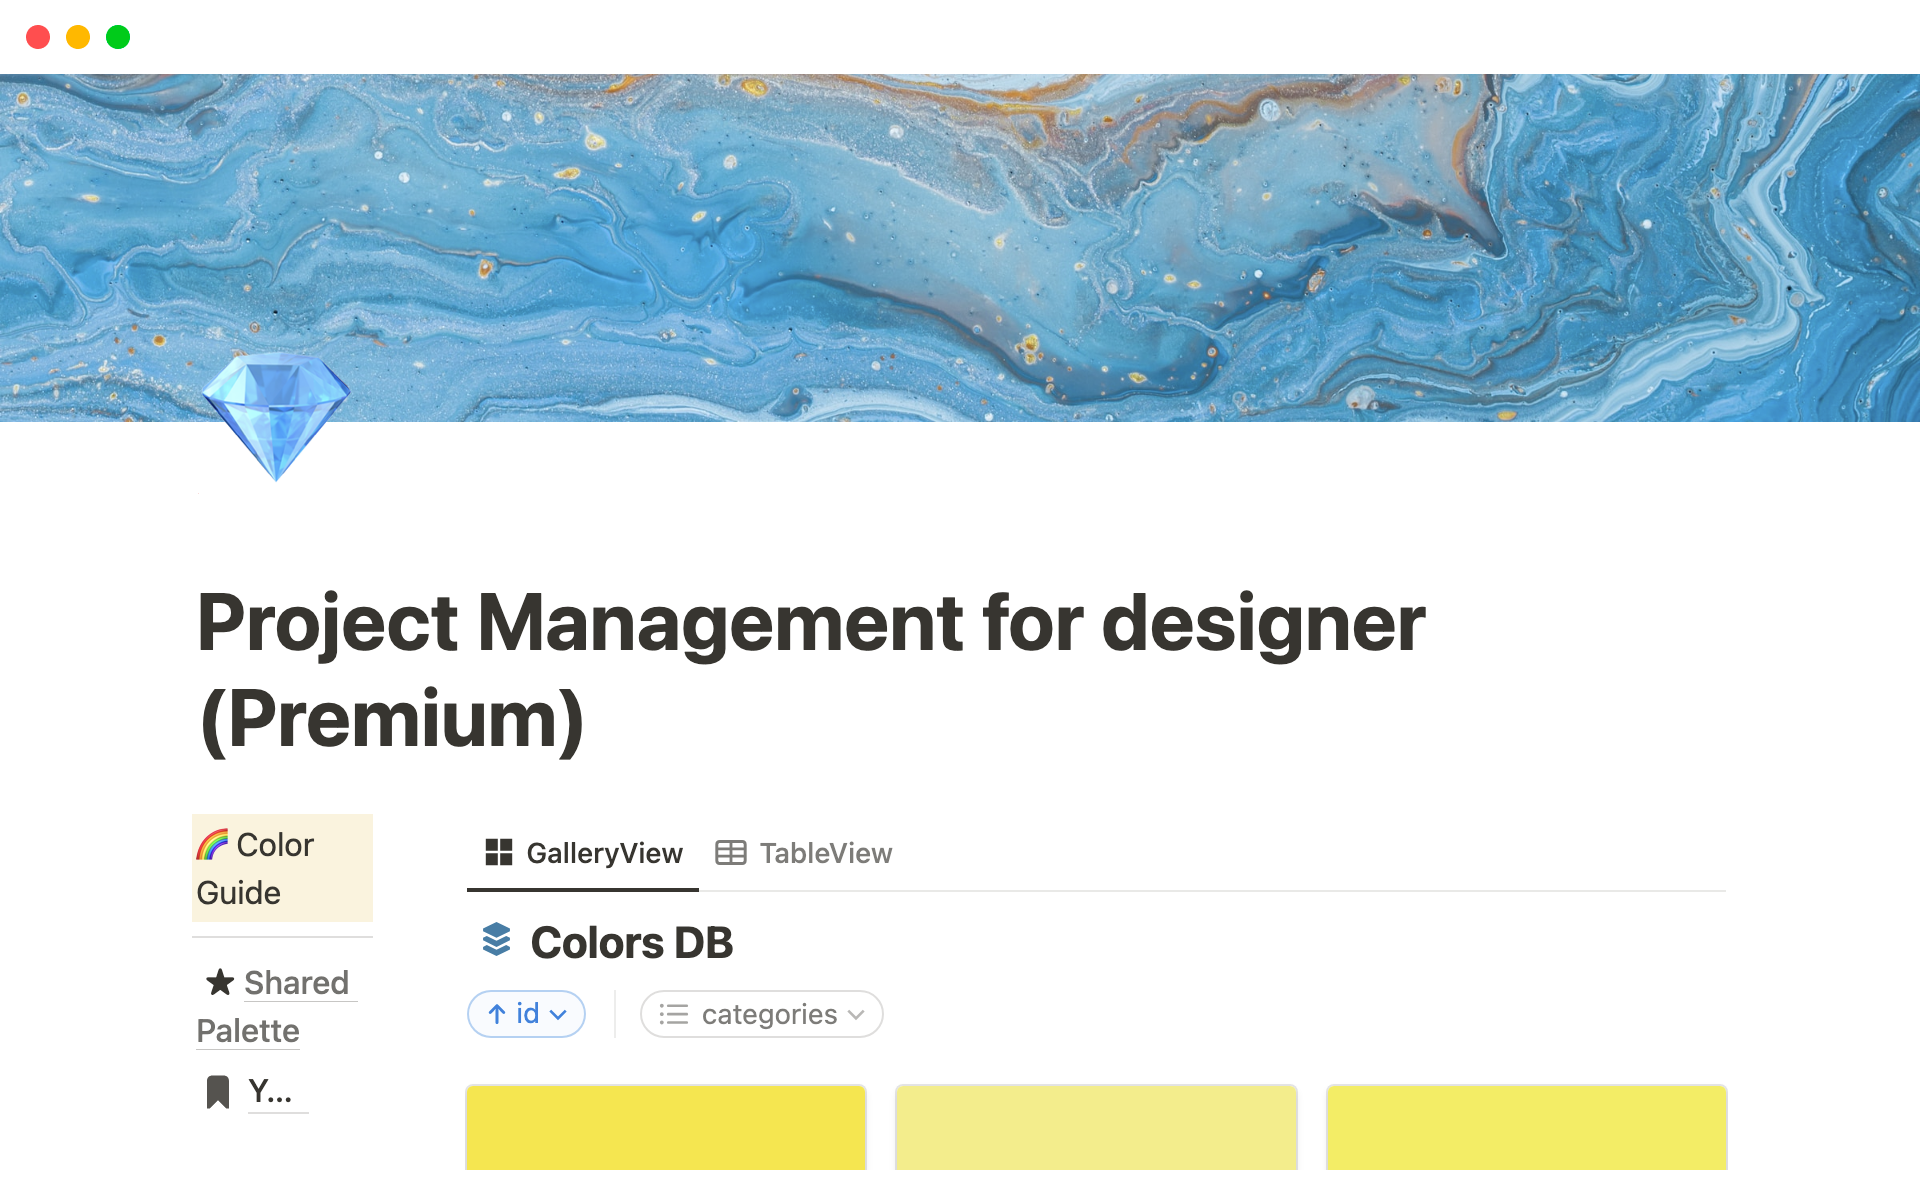 Upgrade the productivity of your design projects by assigning the colors and tasks to them.